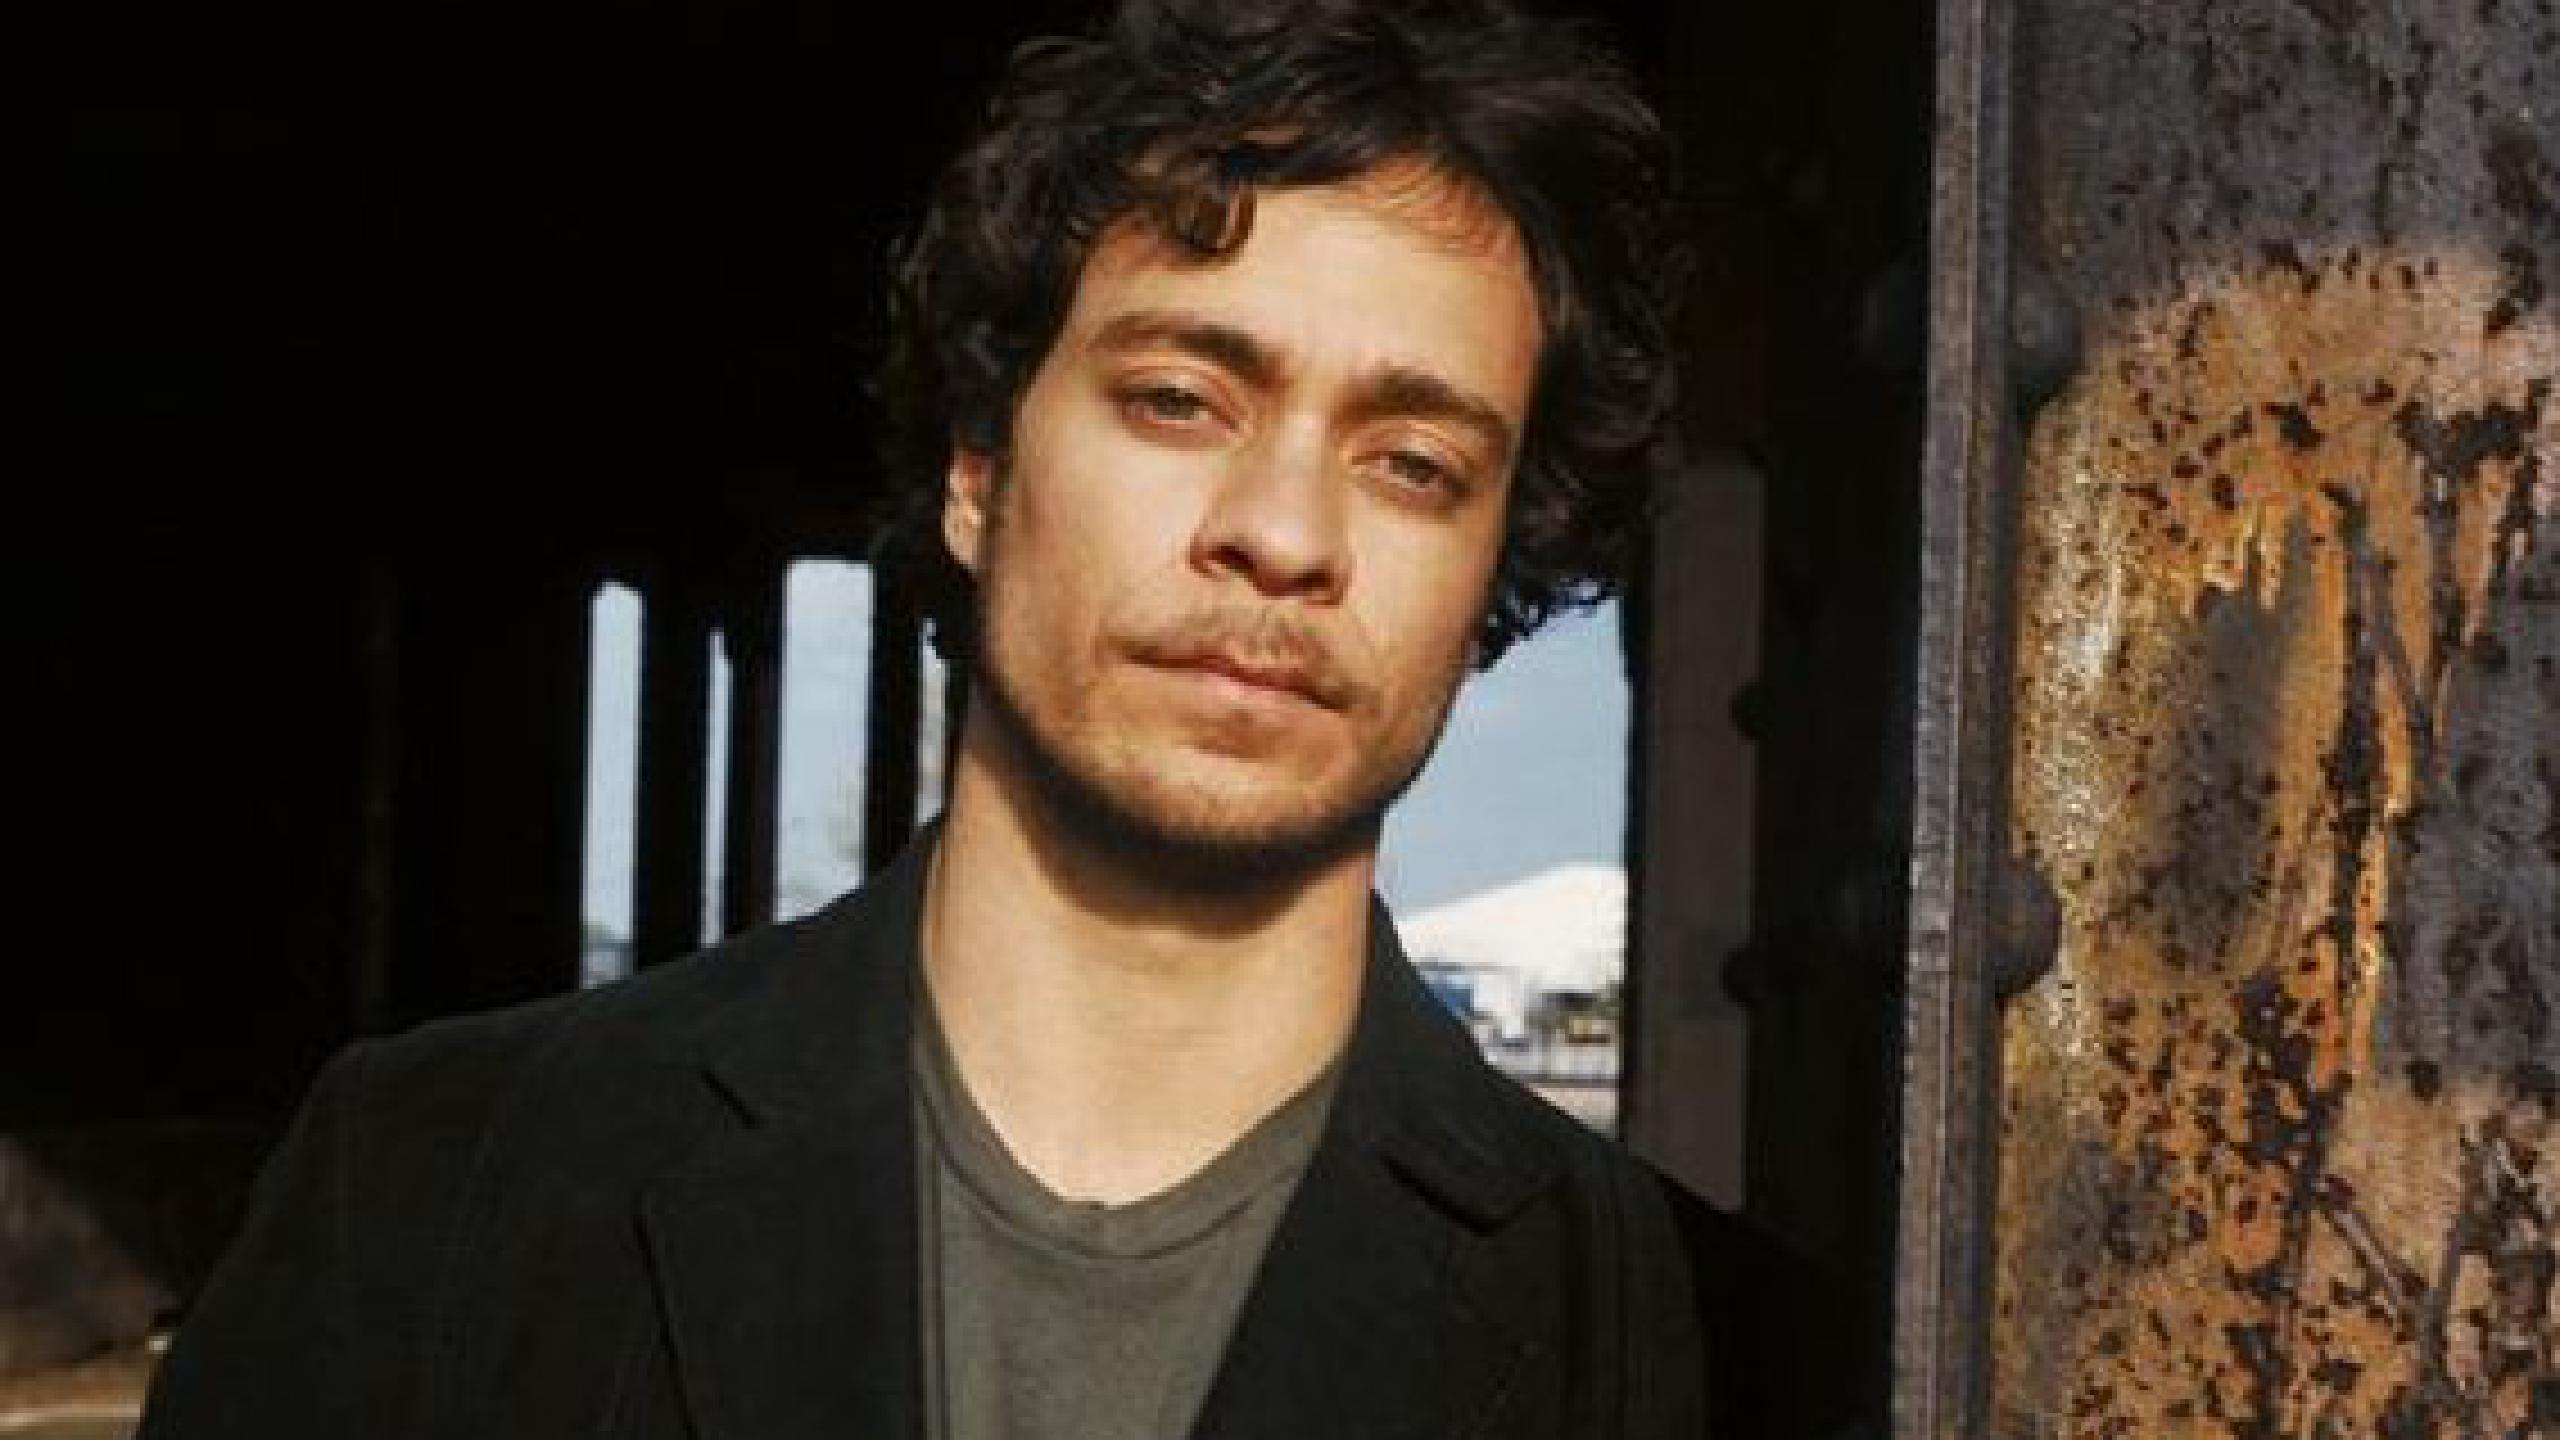 ▷ Amos Lee | Tickets Concerts and Tours 2023 2024 - Wegow